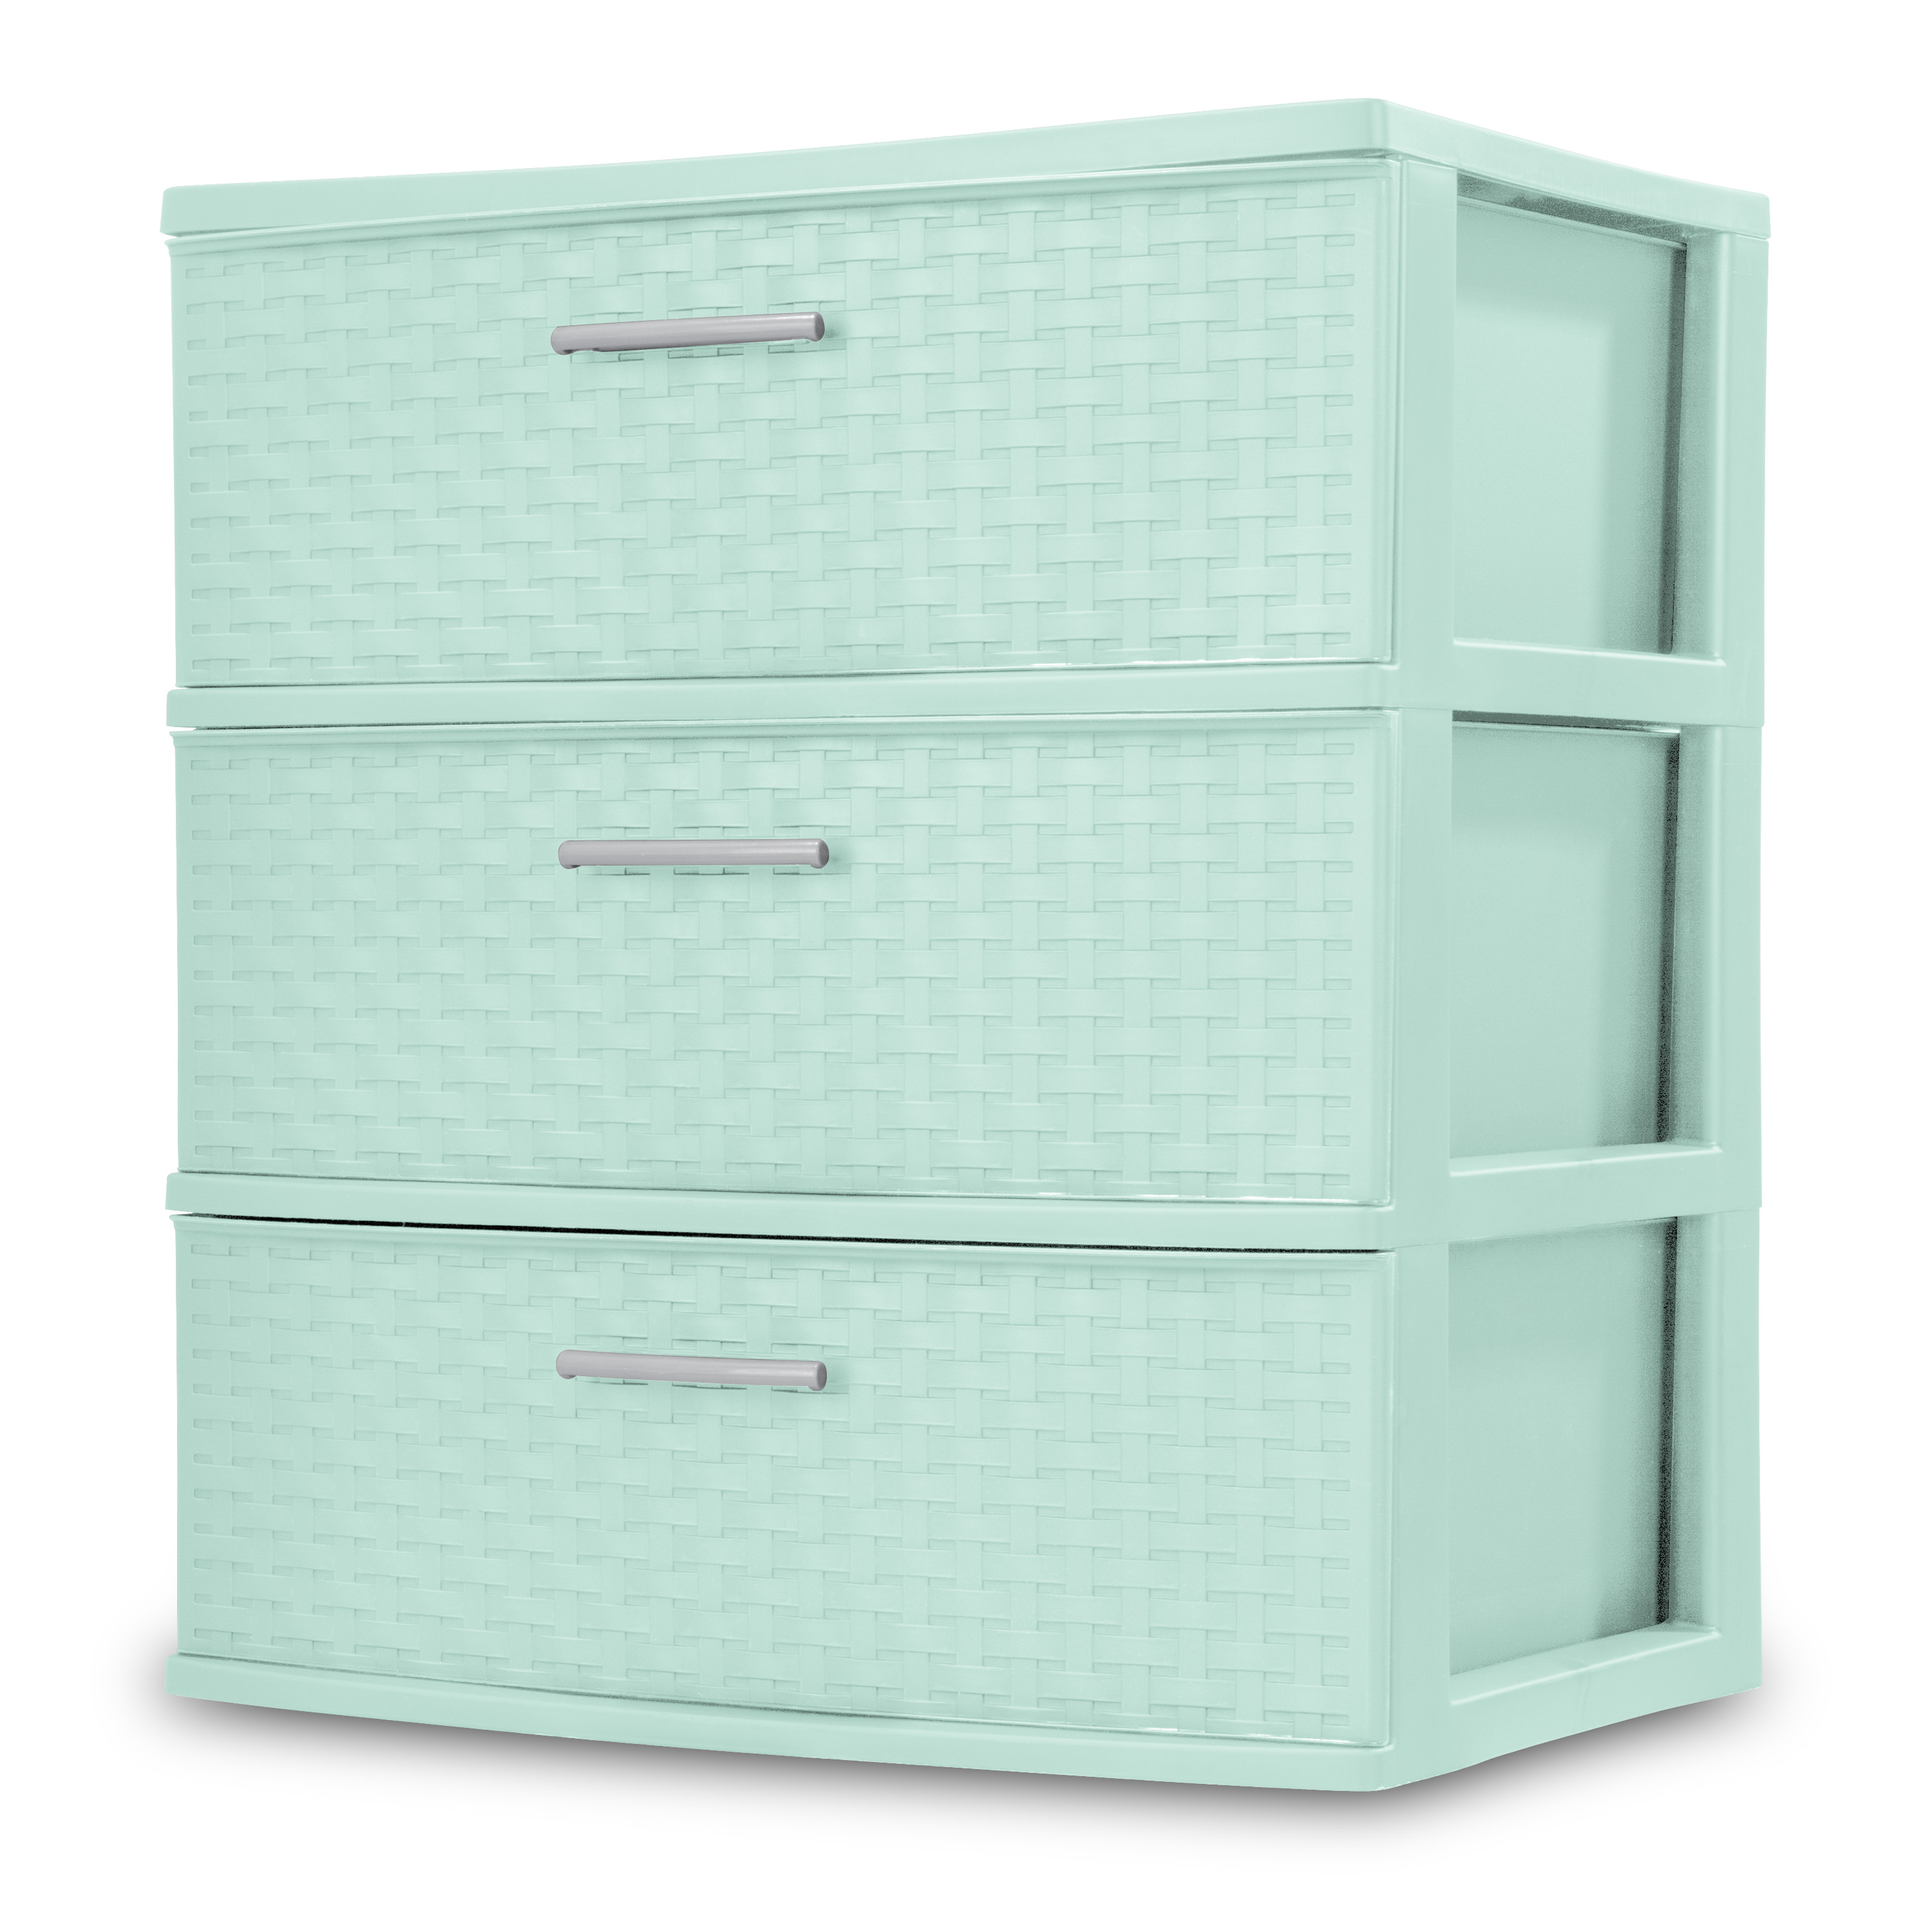 Sterilite 3 Drawer Wide Weave Tower Classic Mint - image 1 of 9